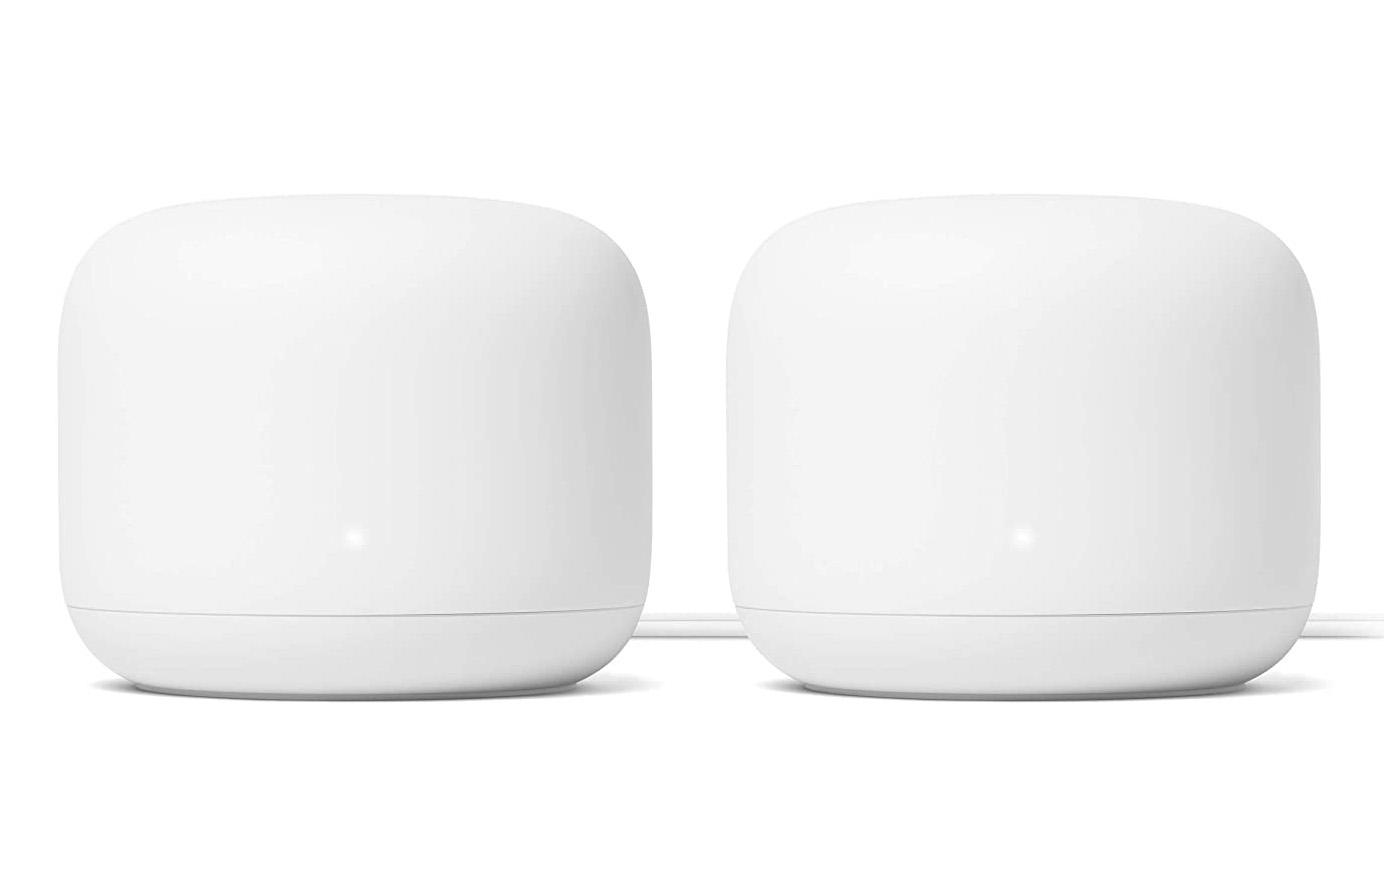 Google Nest Home Wifi Wireless Router System with Extender for $209 Shipped